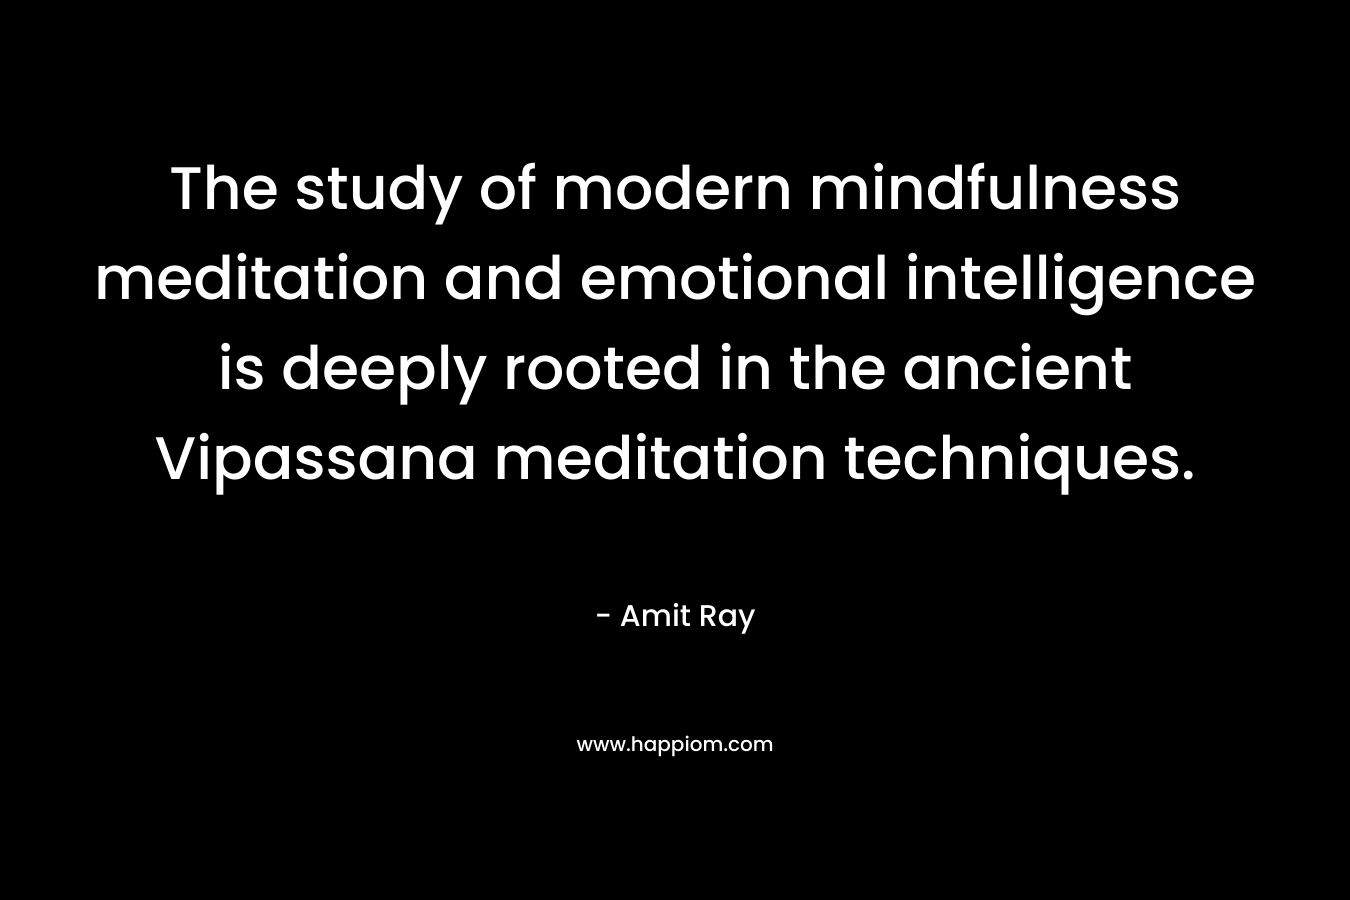 The study of modern mindfulness meditation and emotional intelligence is deeply rooted in the ancient Vipassana meditation techniques. – Amit Ray